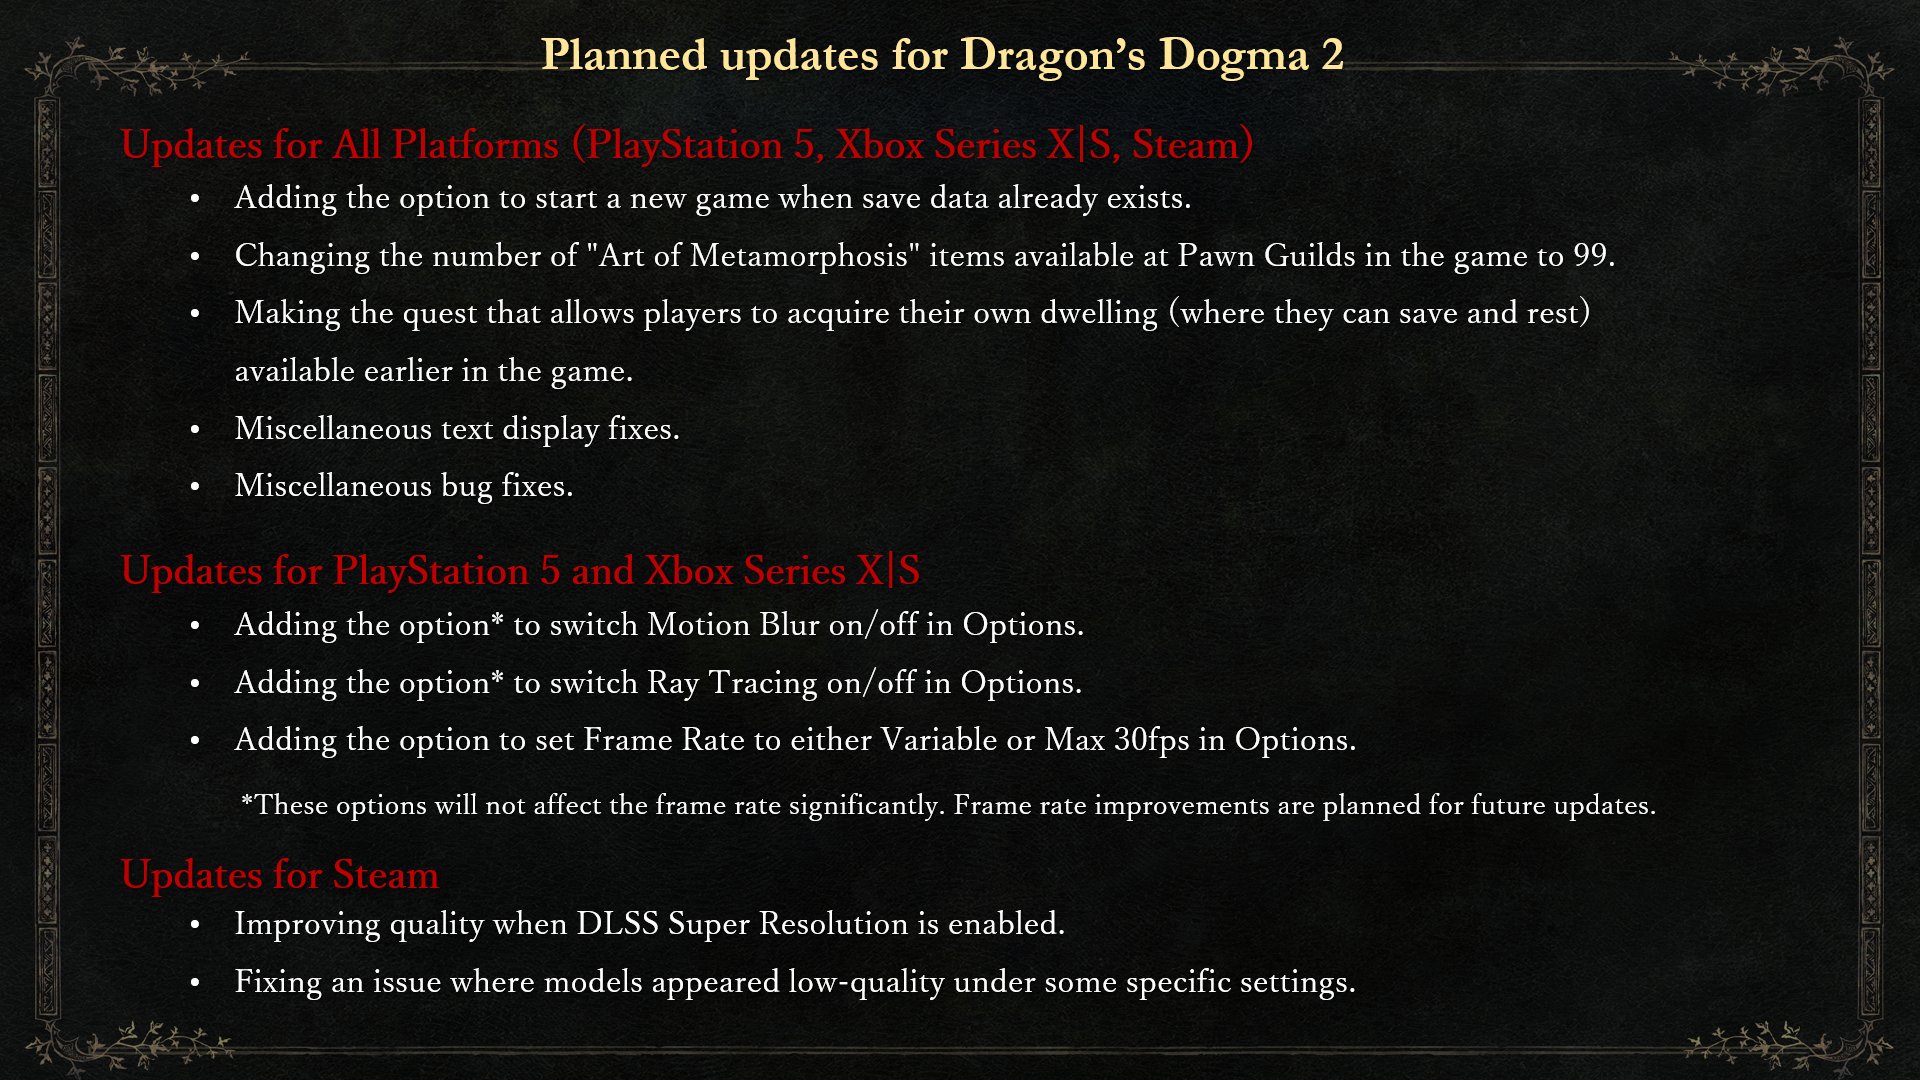 Planned updates for Dragon’s Dogma 2
Updates for All Platforms
Adding the option to start a new game when save data already exists.
Changing the number of "Art of Metamorphosis" items available at Pawn Guilds in the game to 99.
Making the quest that allows players to acquire their own dwelling (where they can save and rest) available earlier in the game.
Miscellaneous text display and bug fixes.
Updates for PlayStation 5 and Xbox Series X|S
Adding the option to switch Motion Blur and Ray Tracing on/off in Options.
Note: These options will not affect the frame rate significantly. Frame rate improvements are planned for future updates.
Adding the option to set the Frame Rate to either Variable or Max 30 in Options.
Updates for Steam
Improving quality when DLSS SUPER RESOLUTION is enabled.
Fixing an issue where models appeared low-quality under some specific settings.